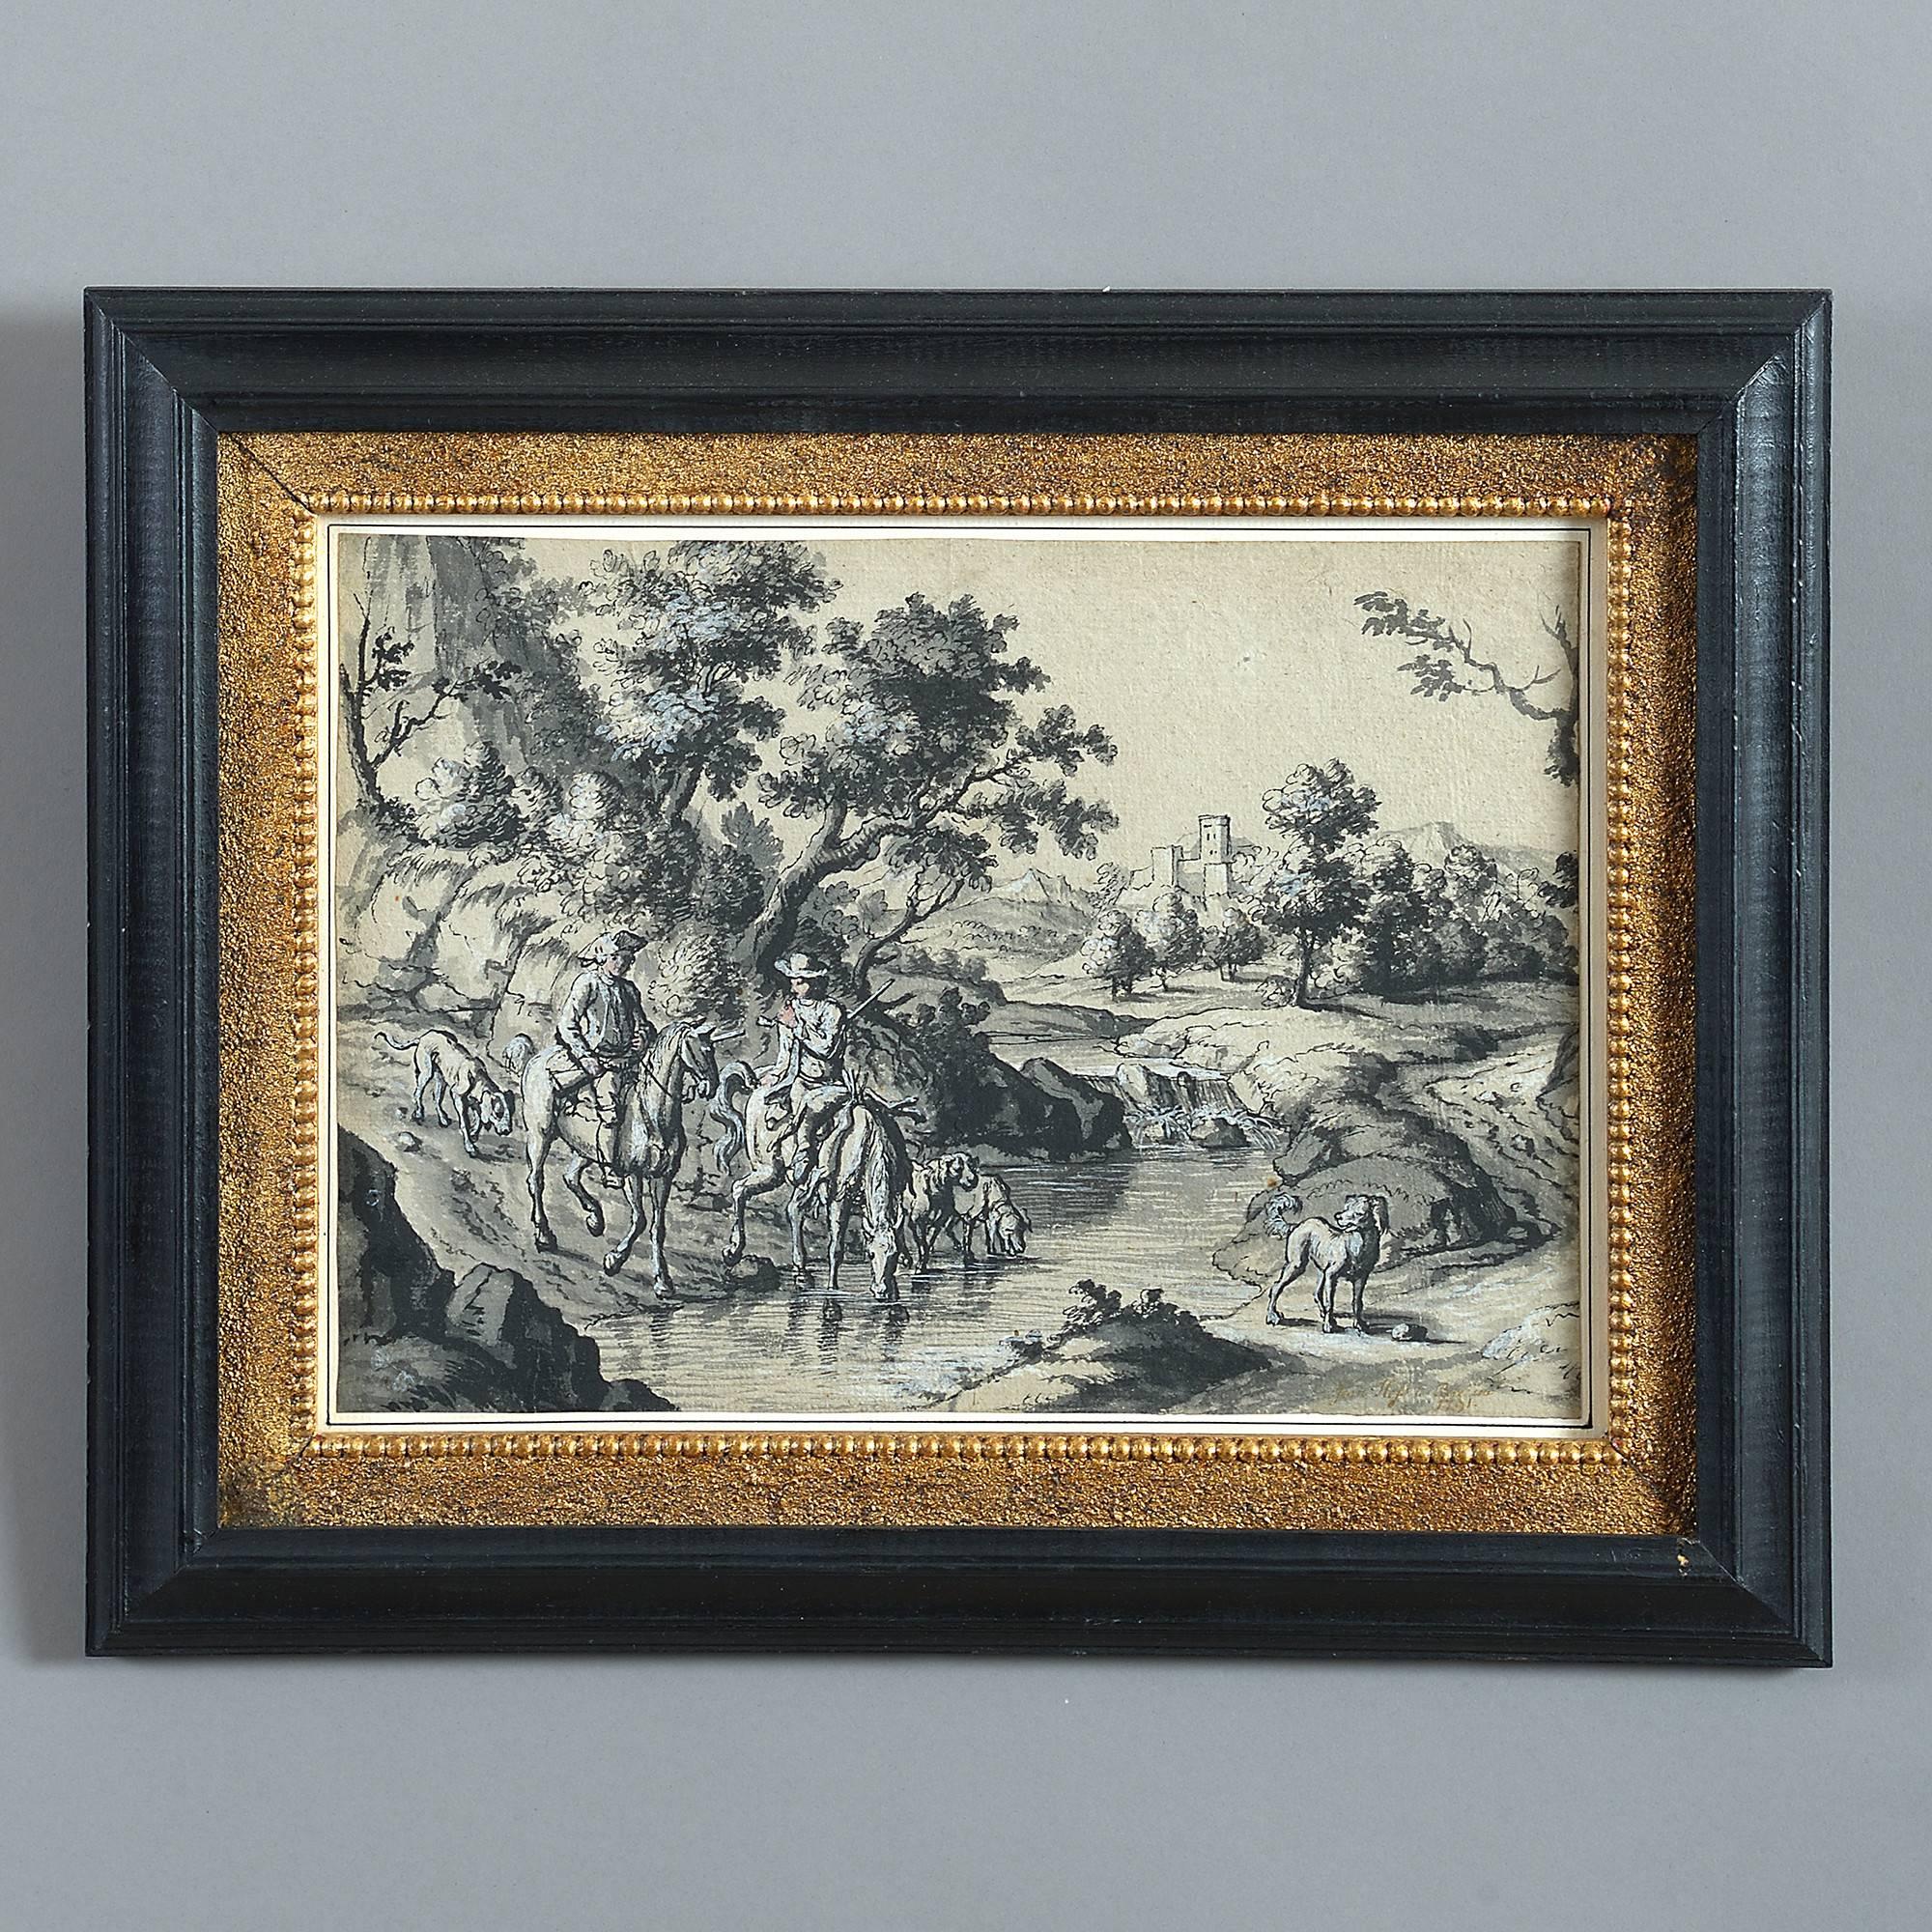 A pair of early 18th century sepia hunting scenes, painted in pen and ink upon paper, depicting men on horseback with hounds and the faces highlighted in gouache.

Ludwig Hess 